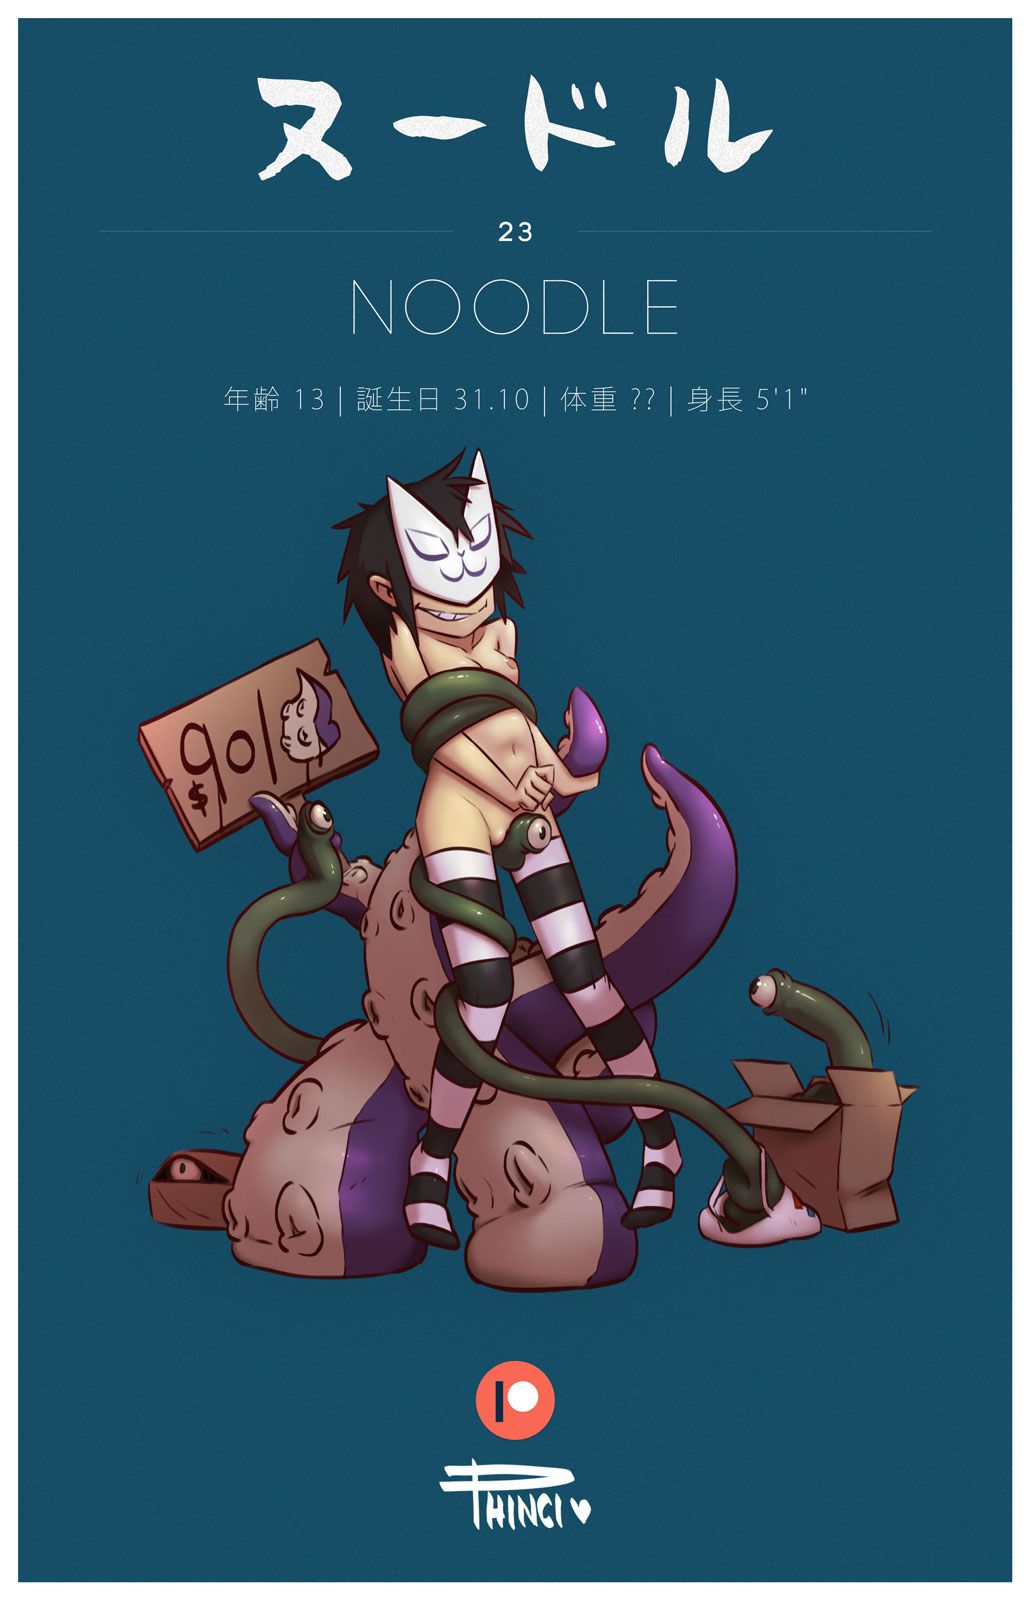 Character - Noodle 512